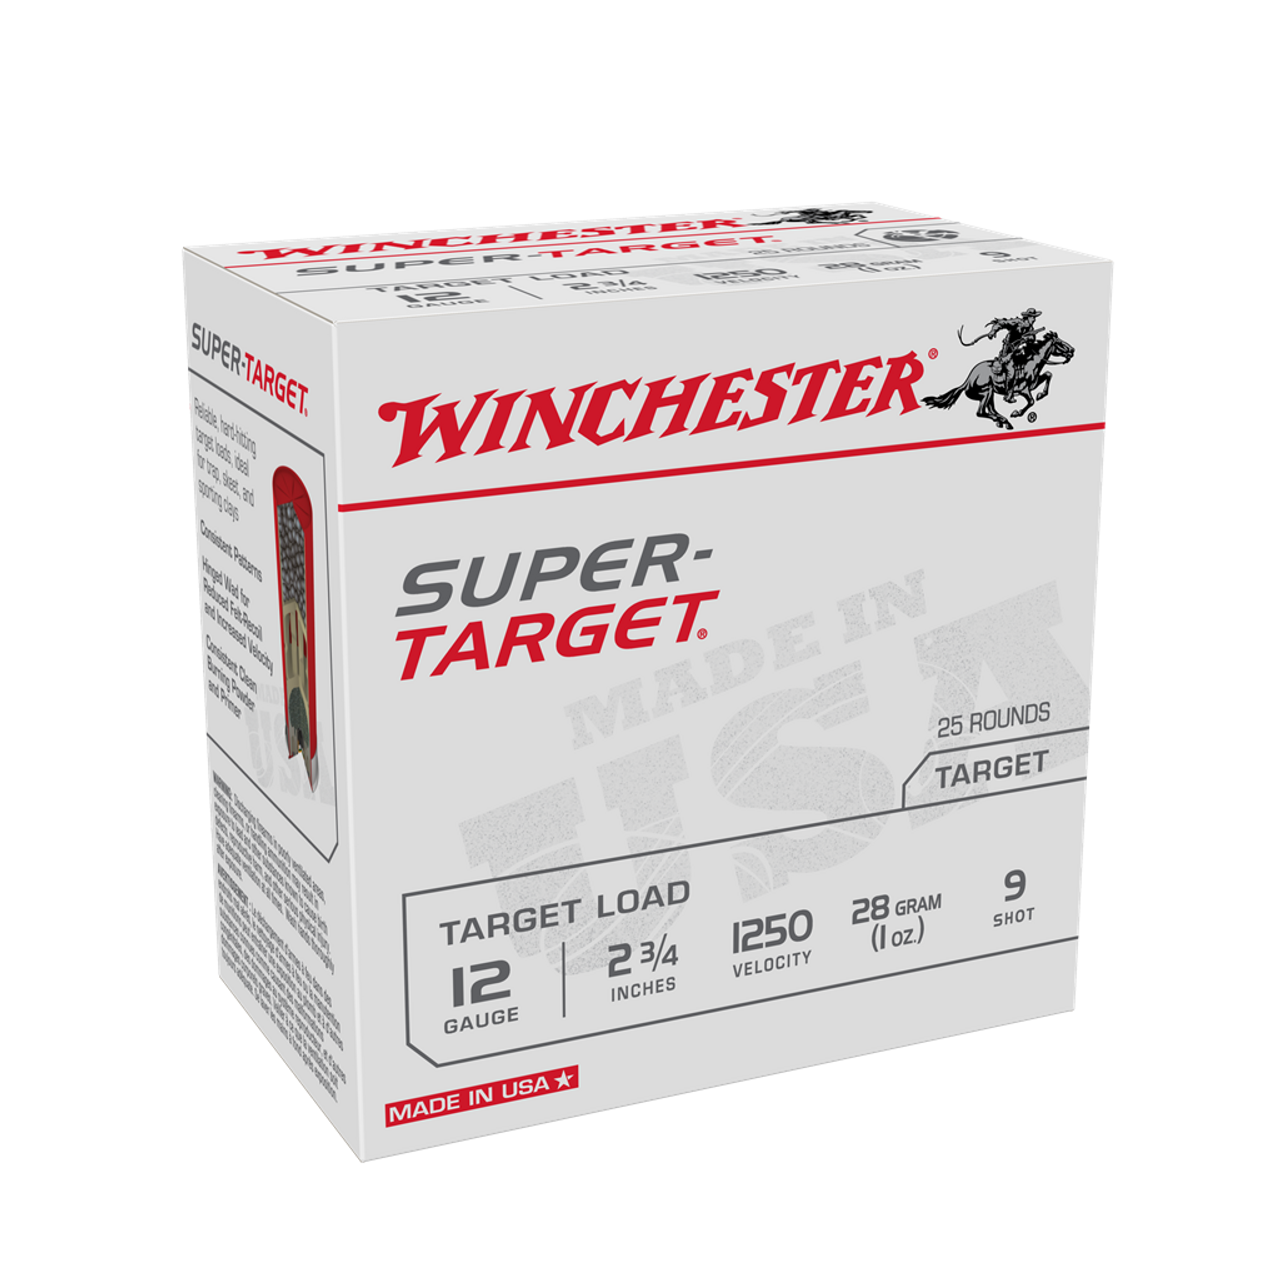 Backed by generations of legendary excellence, Winchester "USA White Box" stands for consistent performance and outstanding value, offering high-quality ammunition to suit a wide range of hunter's and shooter's needs.

Hinged Wad for Reduced Felt-Recoil and Increased Velocity
 
Consistent Clean Burning Powder and Primer
 
Consistent Patterns
 
Reliable, hard-hitting target loads, ideal for trap, skeet, and sporting clays
12 Gauge, 2.75" Features